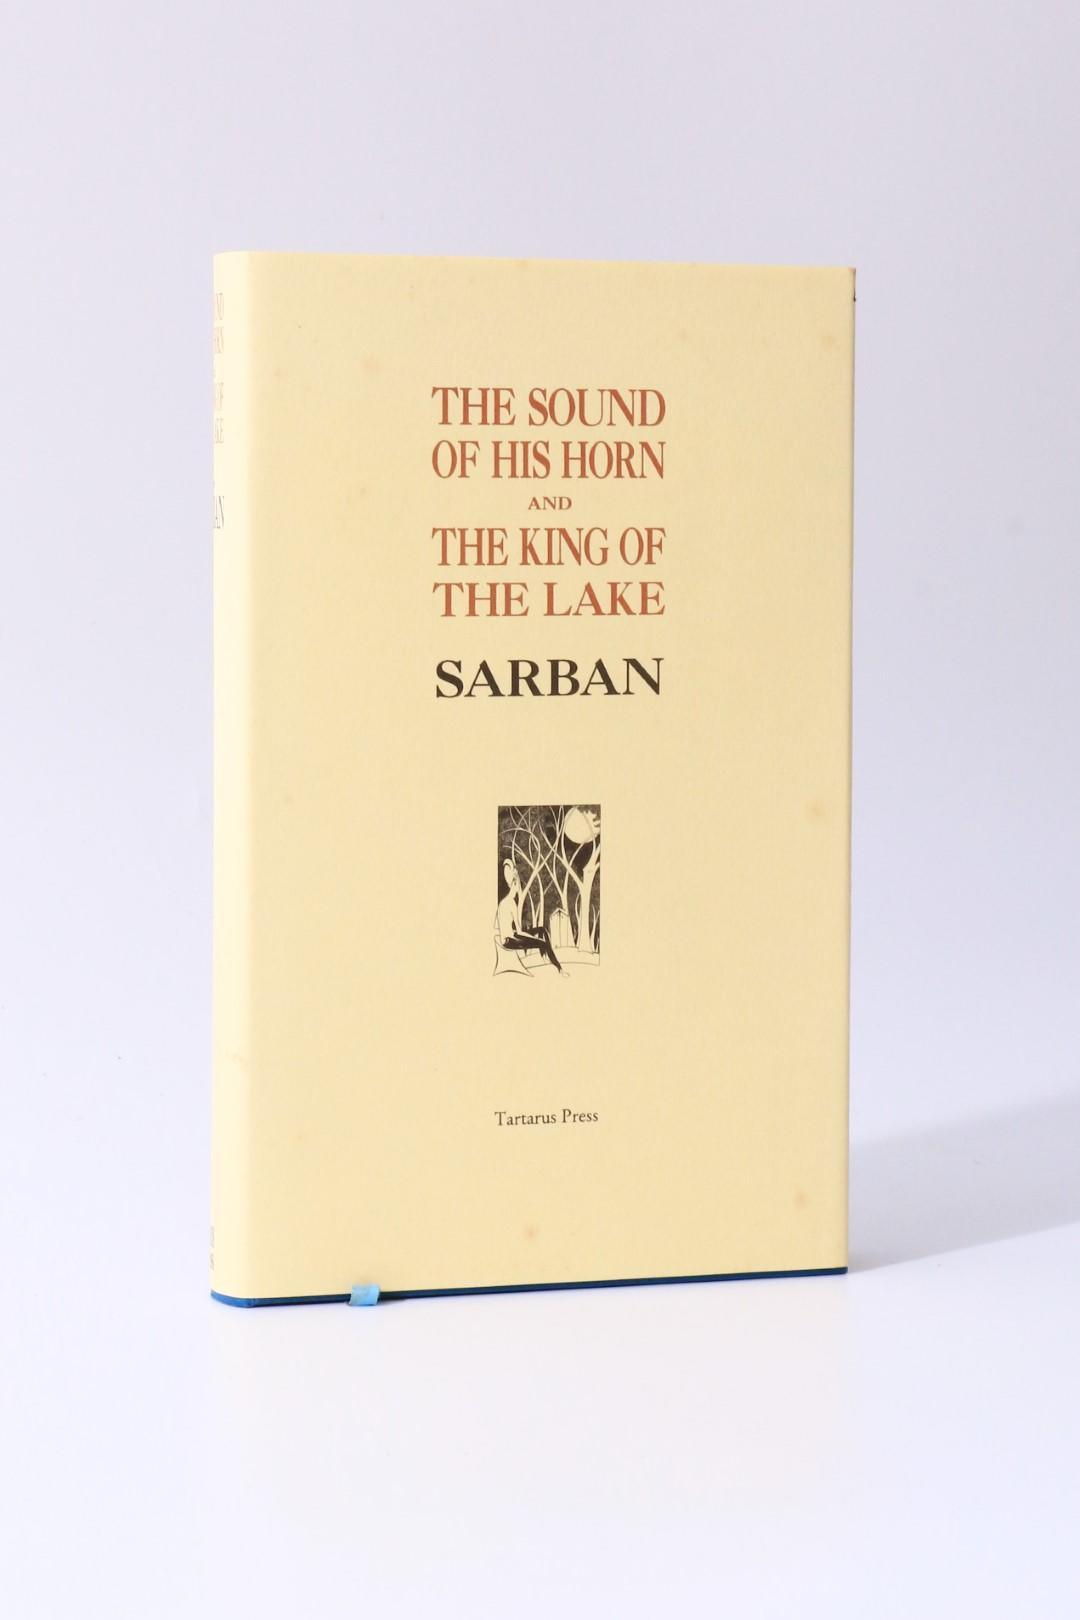 Sarban - The Sound of His Horn and The King of the Lake - Tartarus Press, 1999, Limited Edition.